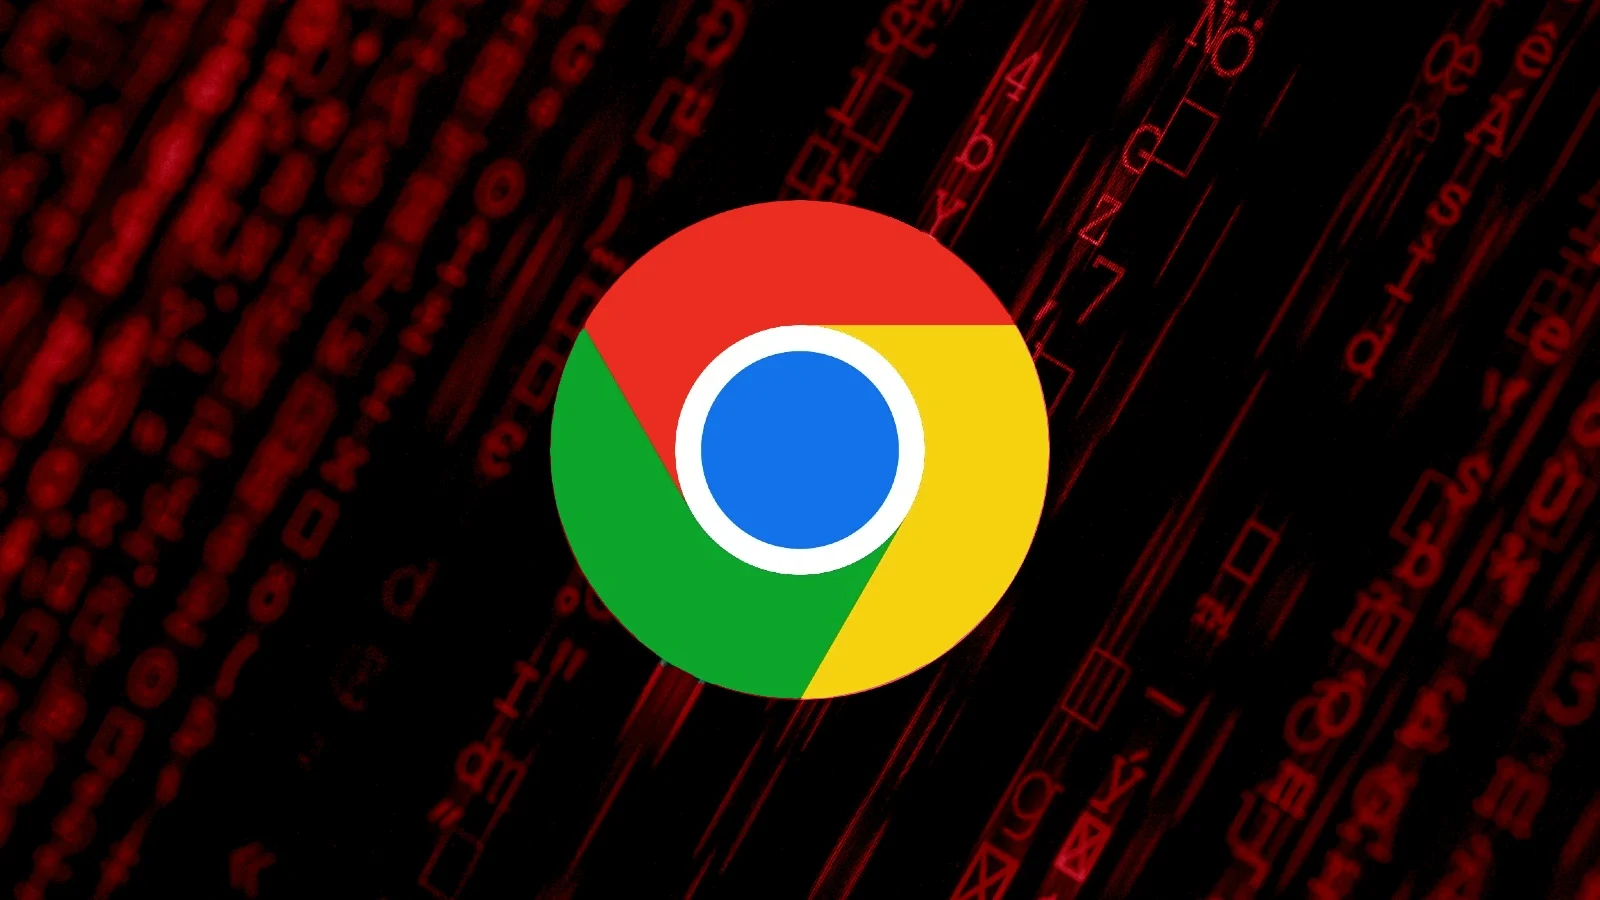 CERT-In Warns of Severe Vulnerabilities in Google Chrome and iTunes—Update Now to Safeguard